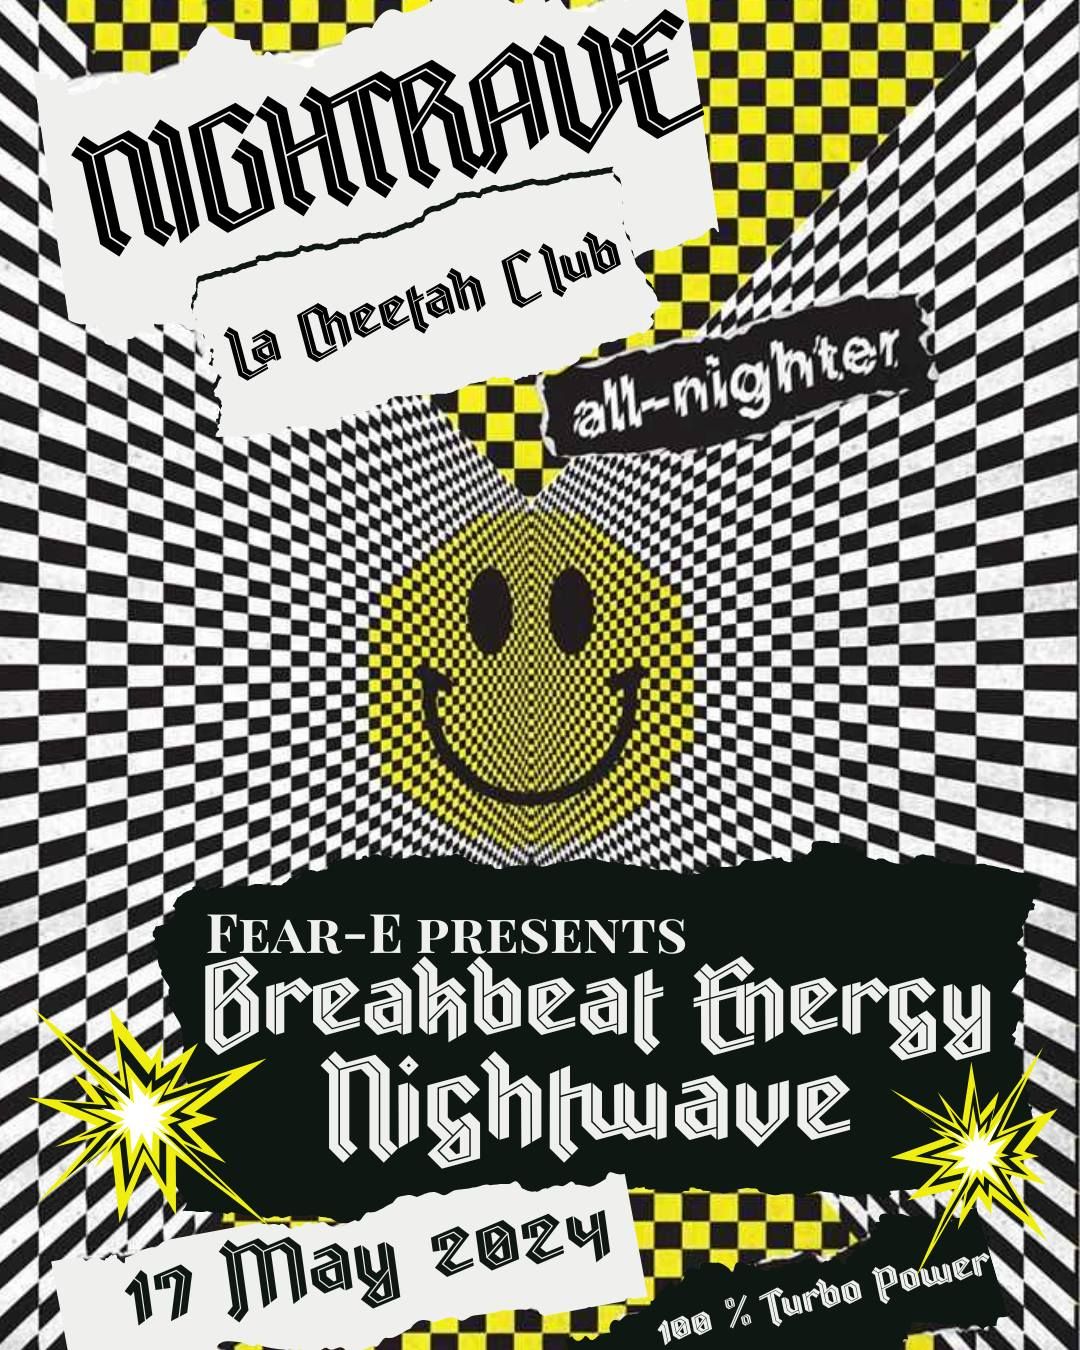 Nightrave with Breakbeat Energy and Nightwave